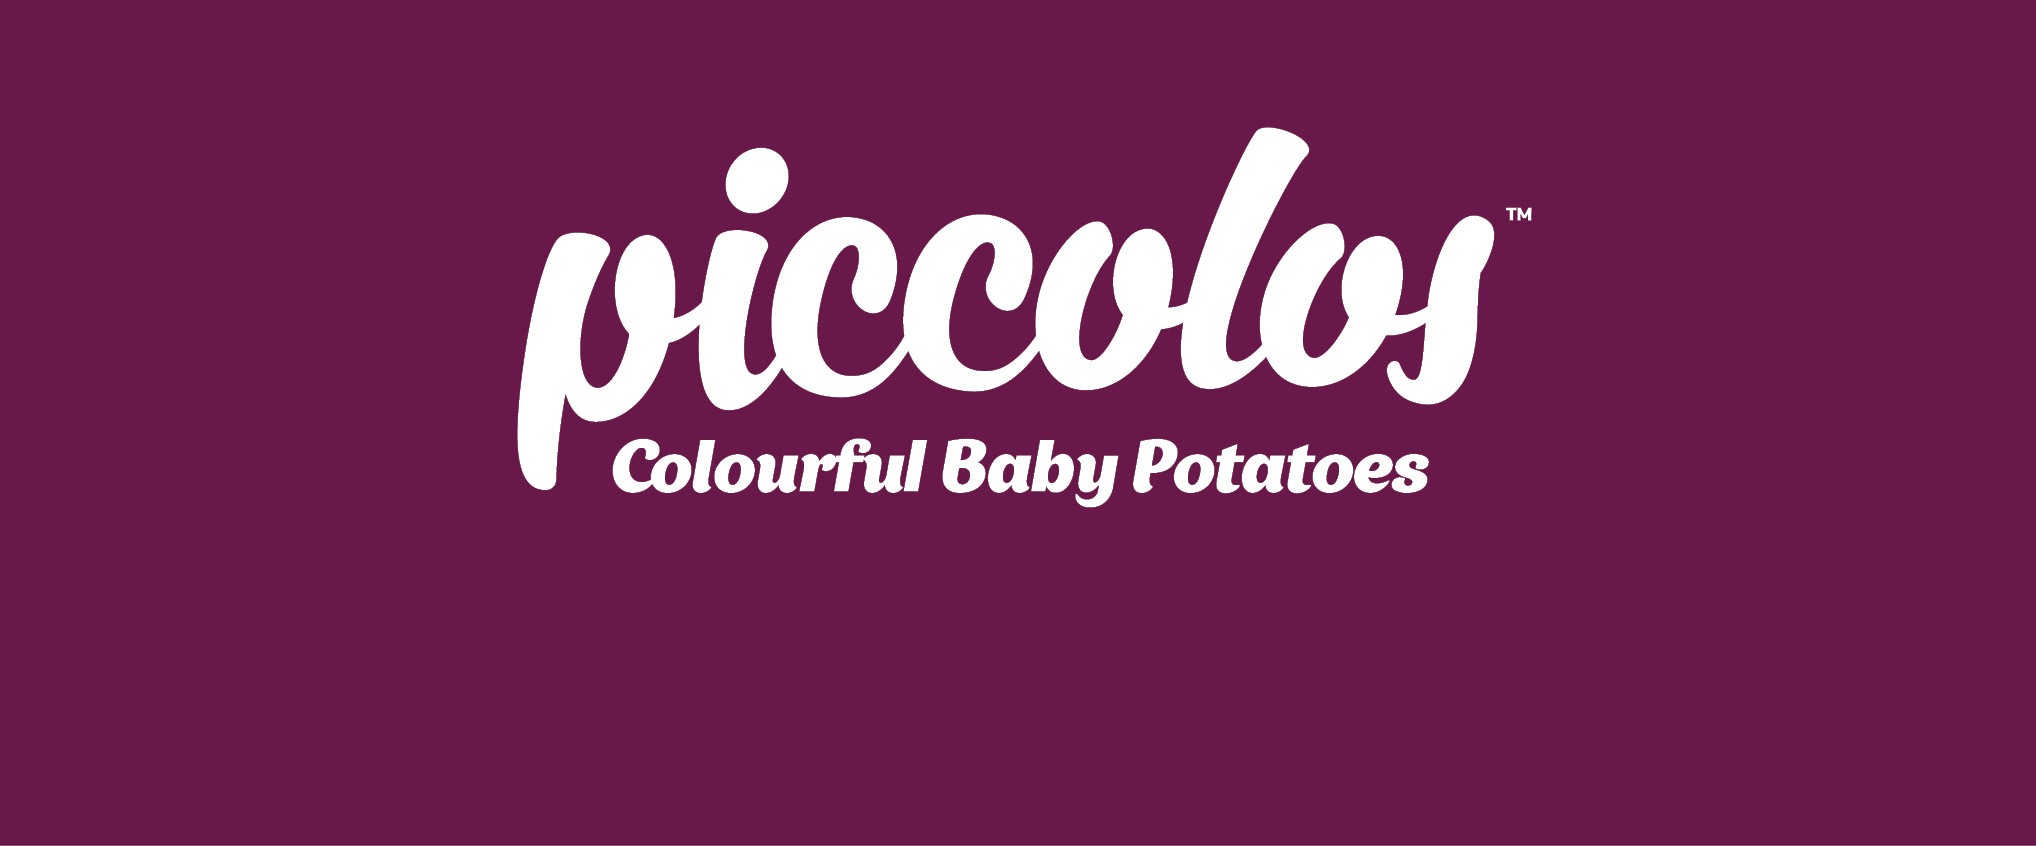 Baby-sized potatoes with grown-up flavour